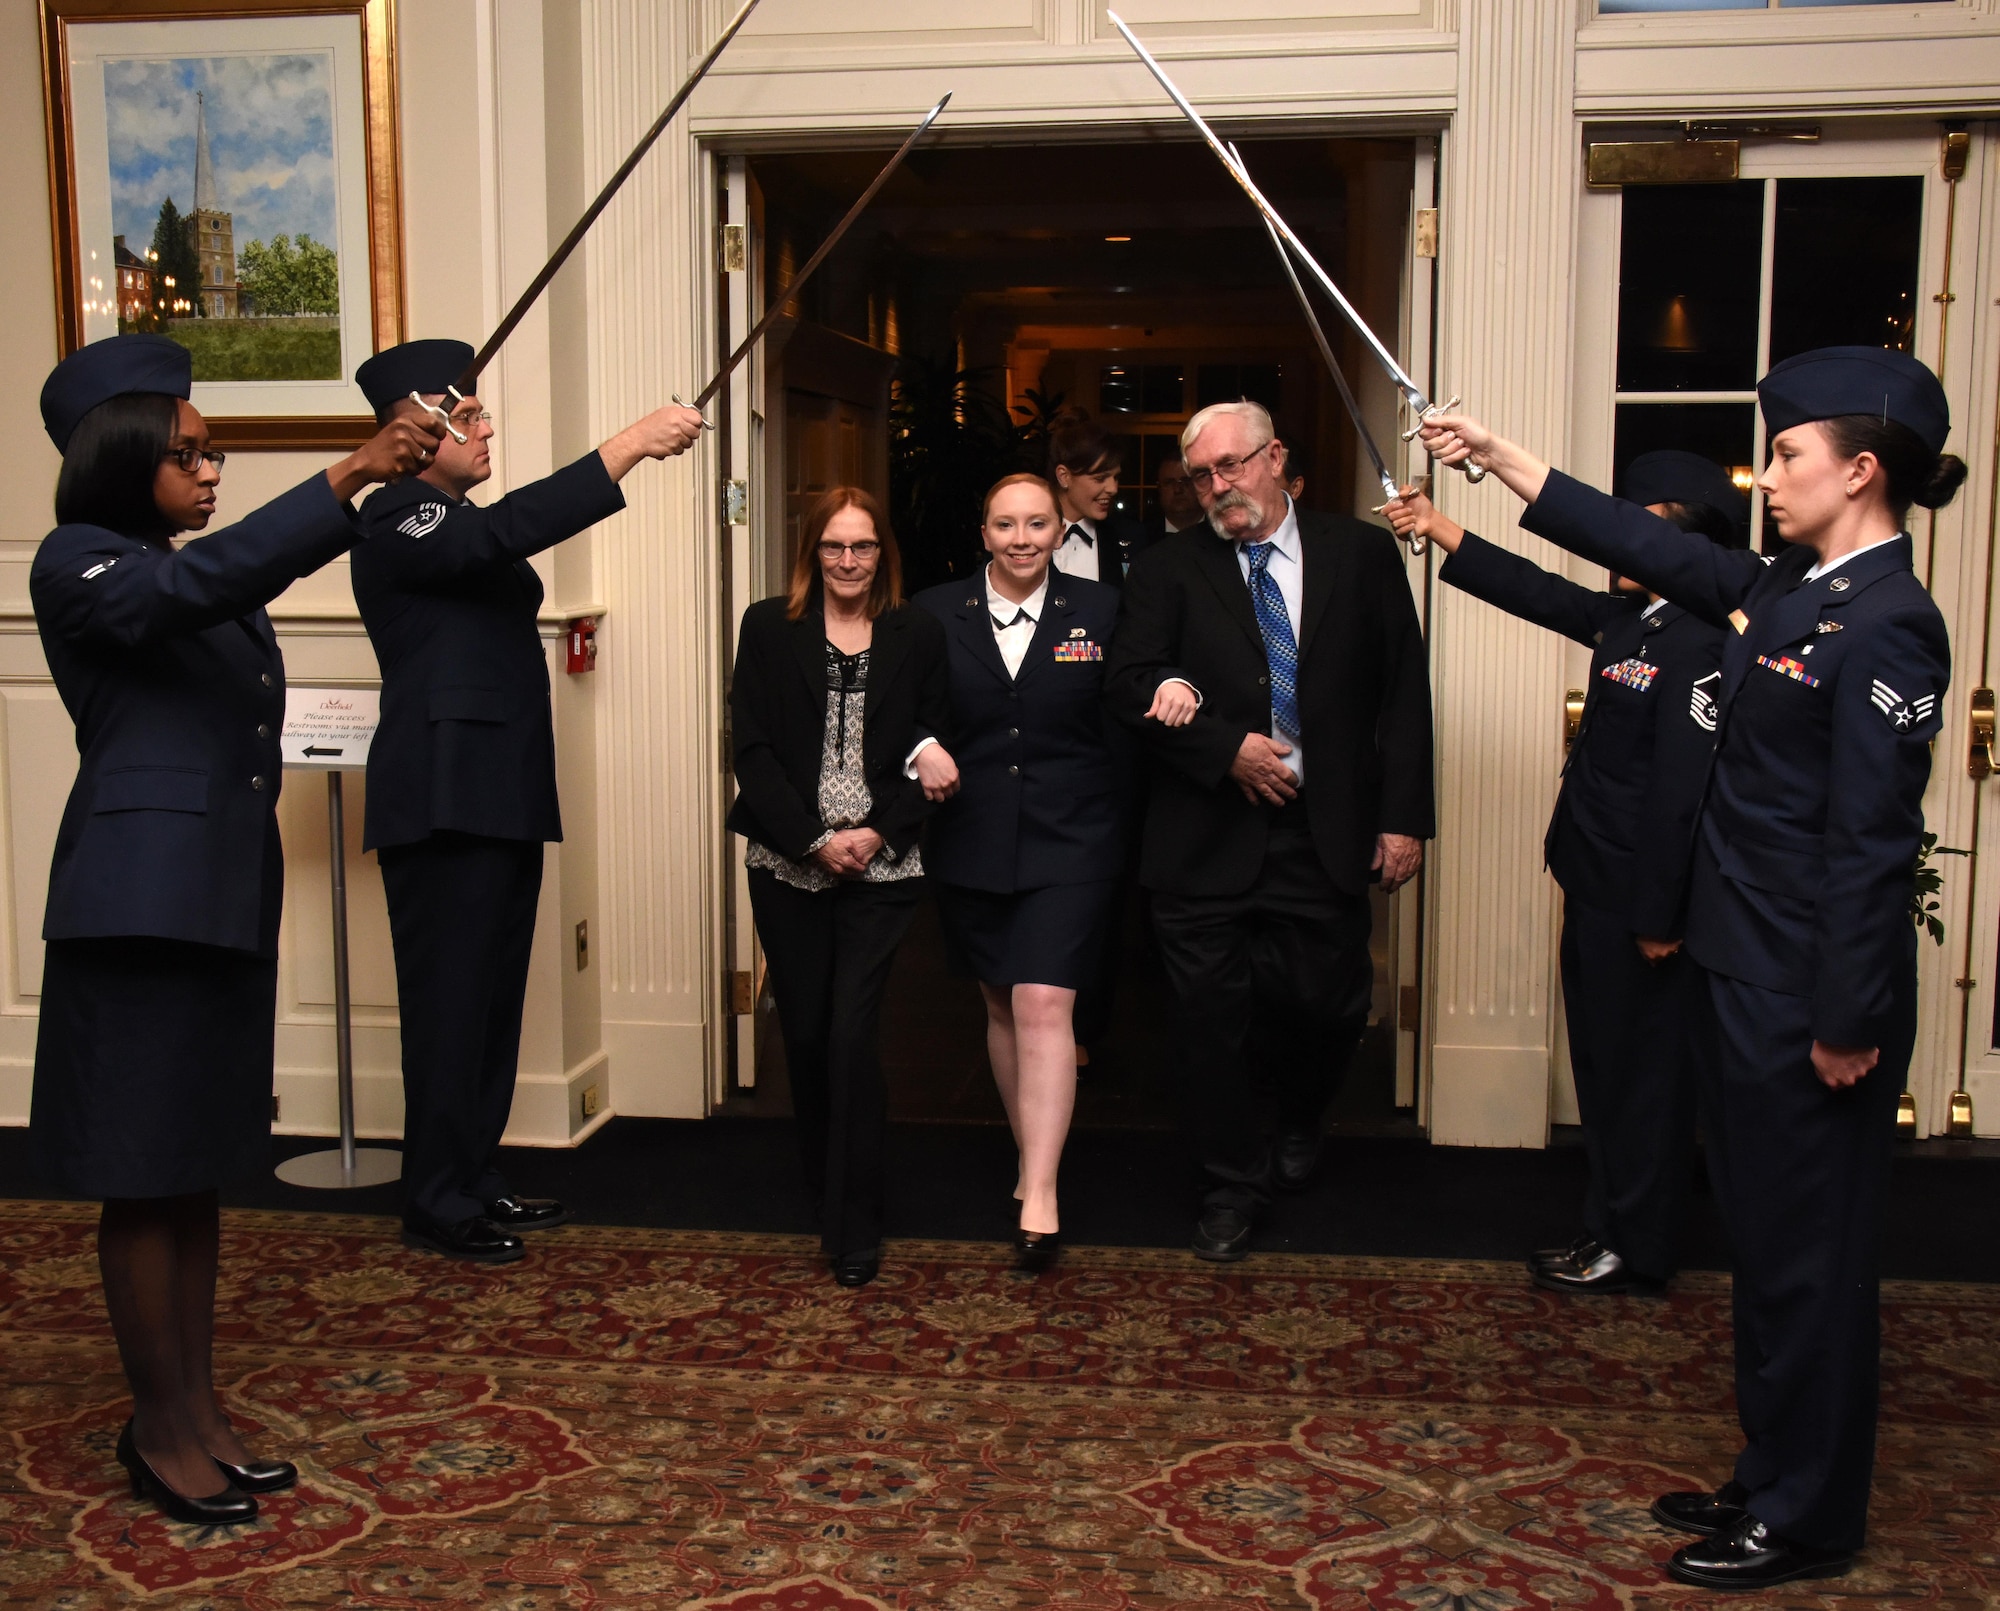 NEWARK, DE- Staff Sgt. Gabrielle Rieker, family readiness program manager, 166th Airlift Wing, enters the Deerfield Golf and Tennis Club ballroom with her parents Laura and Bill Rieker, during the Delaware Air National Guard Annual Enlisted Recognition Banquet held on March 4, 2017. Rieker received the 2016 Airman of the Year Award, which is awarded to an airman between the rank of E1-E4 for stellar performance and going above and beyond. (U.S. Air National Guard photo by Tech. Sgt. Gwendolyn Blakley/ Released).